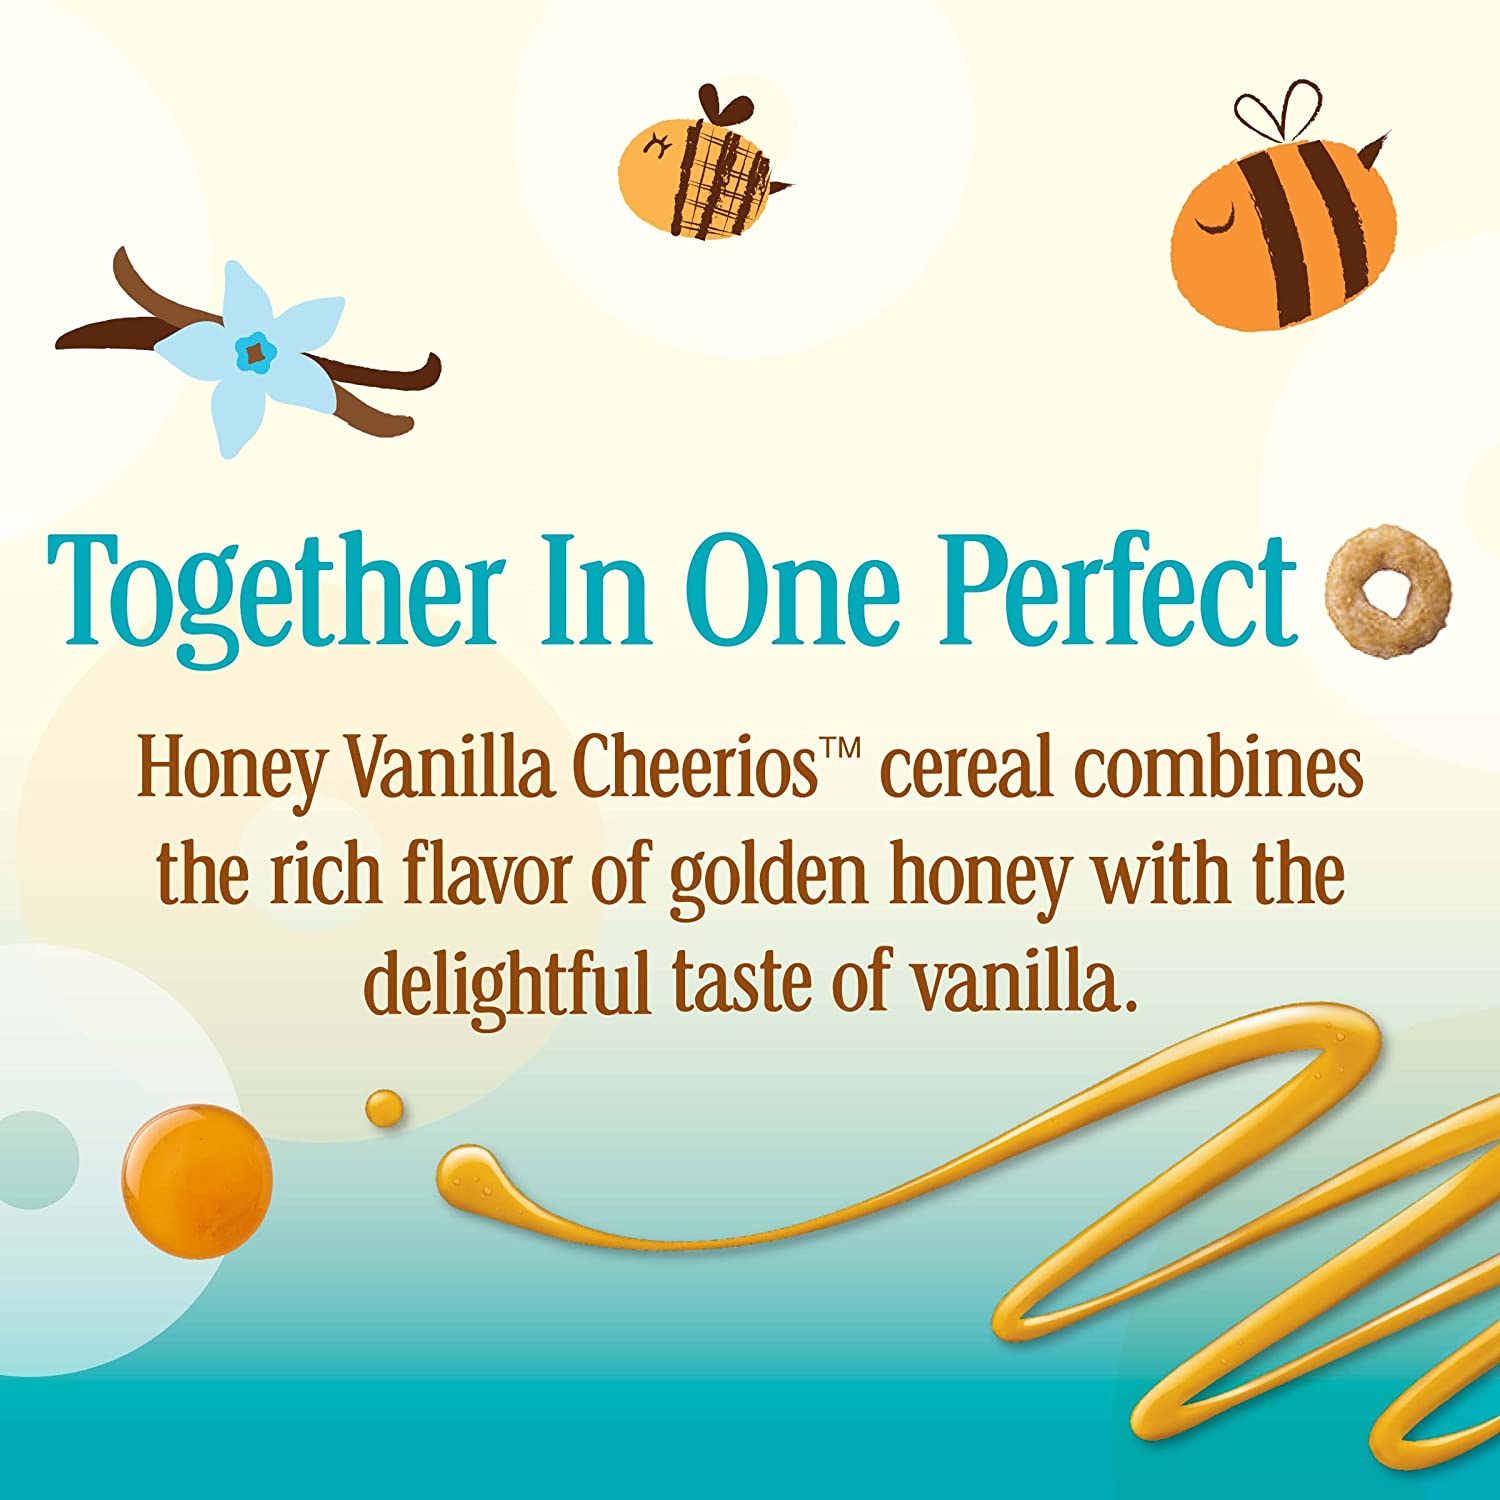 Cheerios Honey Vanilla Heart Healthy Cereal, Gluten Free Cereal With Whole Grain Oats, Family Size, 18.1 OZ